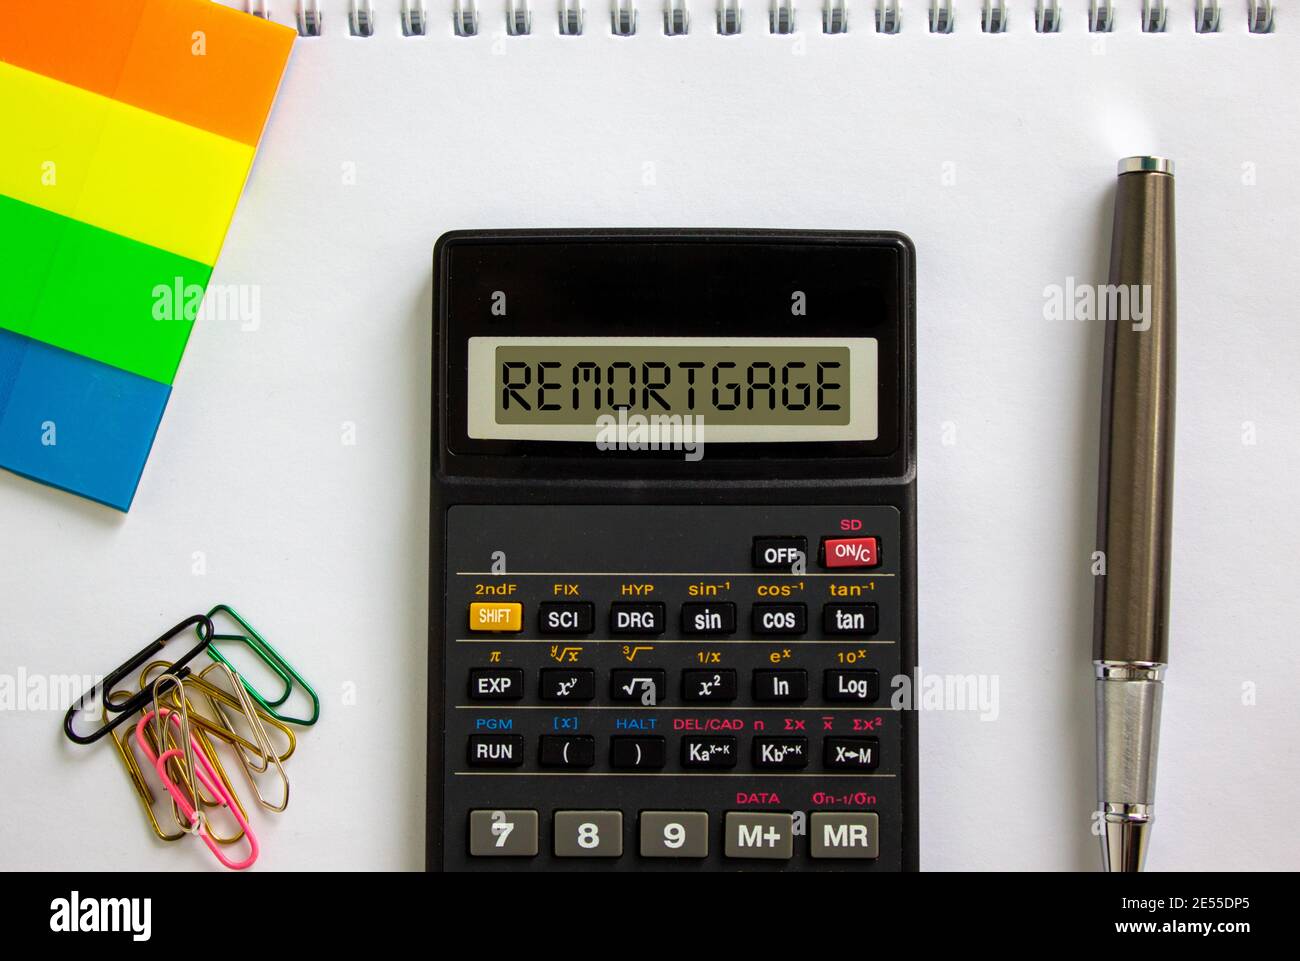 Remortgage symbol. Calculator with the word 'remortgage', white note, colored paper, paper clips, pen. Business and remortgage concept. Stock Photo